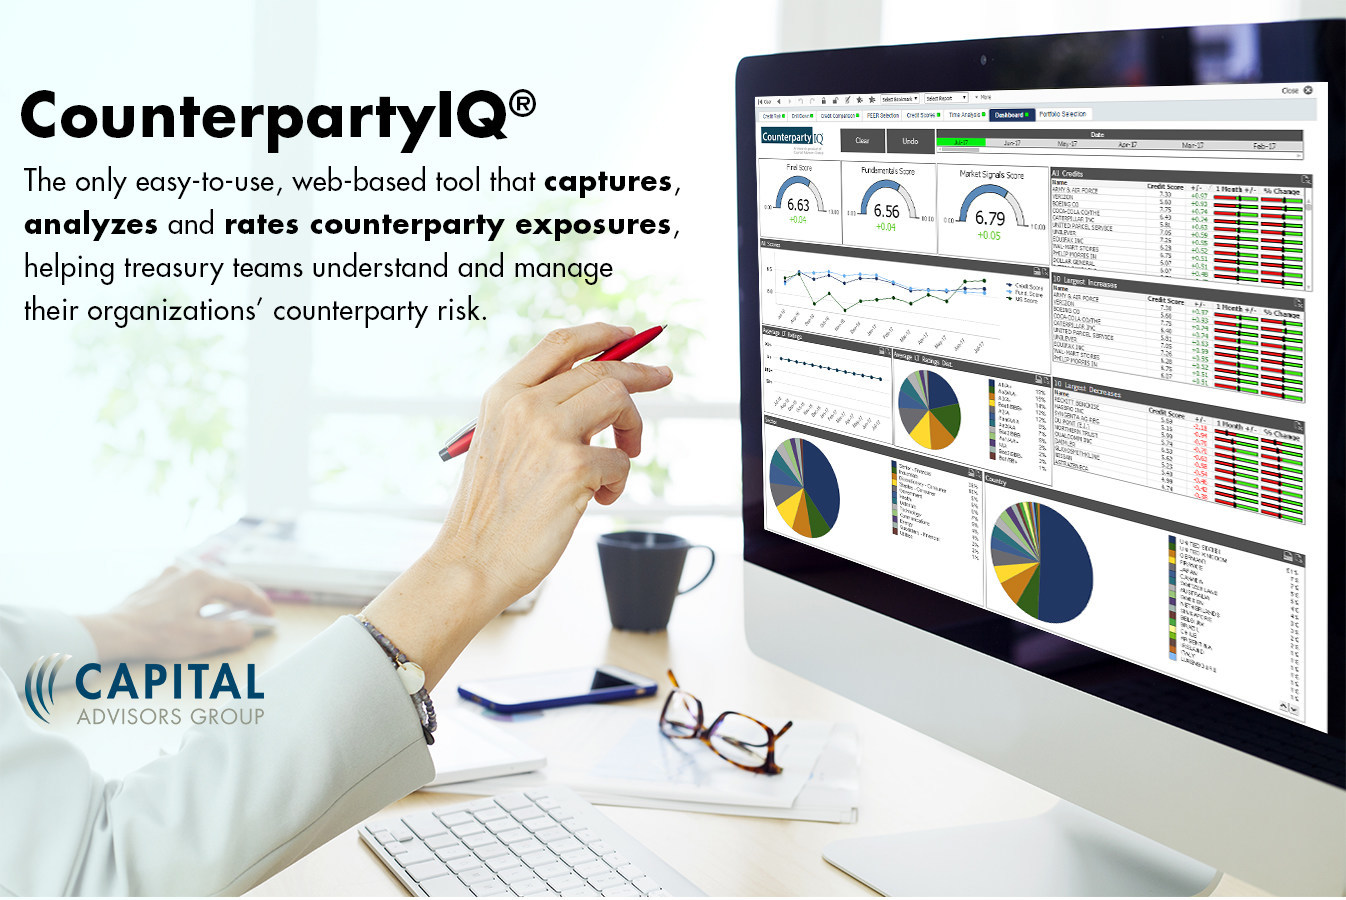 CounterpartyIQ® from Capital Advisors Group